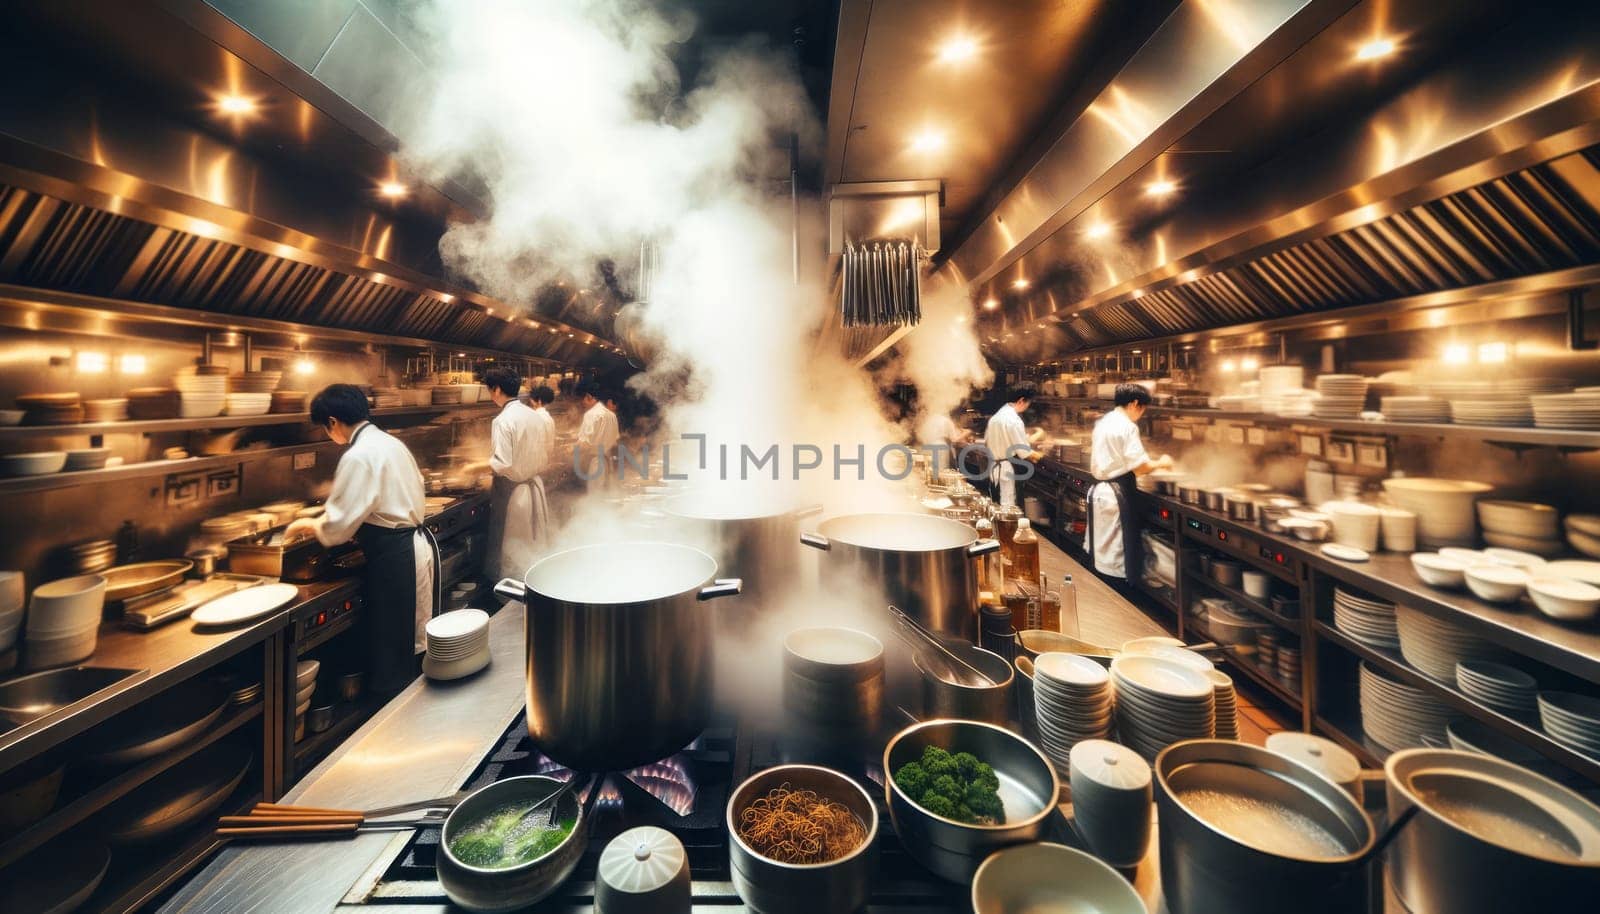 A wide-angle photography capturing the busy atmosphere of a professional kitchen. The focus is on the steam rising from large pots on stoves, with chefs working diligently in the background. The kitchen is filled with stainless steel appliances, and the shelves are stocked with various cooking ingredients and utensils. The lighting is warm and highlights the steam, suggesting heat and the fast-paced environment. The chefs are wearing traditional white uniforms, which stand out against the metallic and wood accents of the kitchen interior.